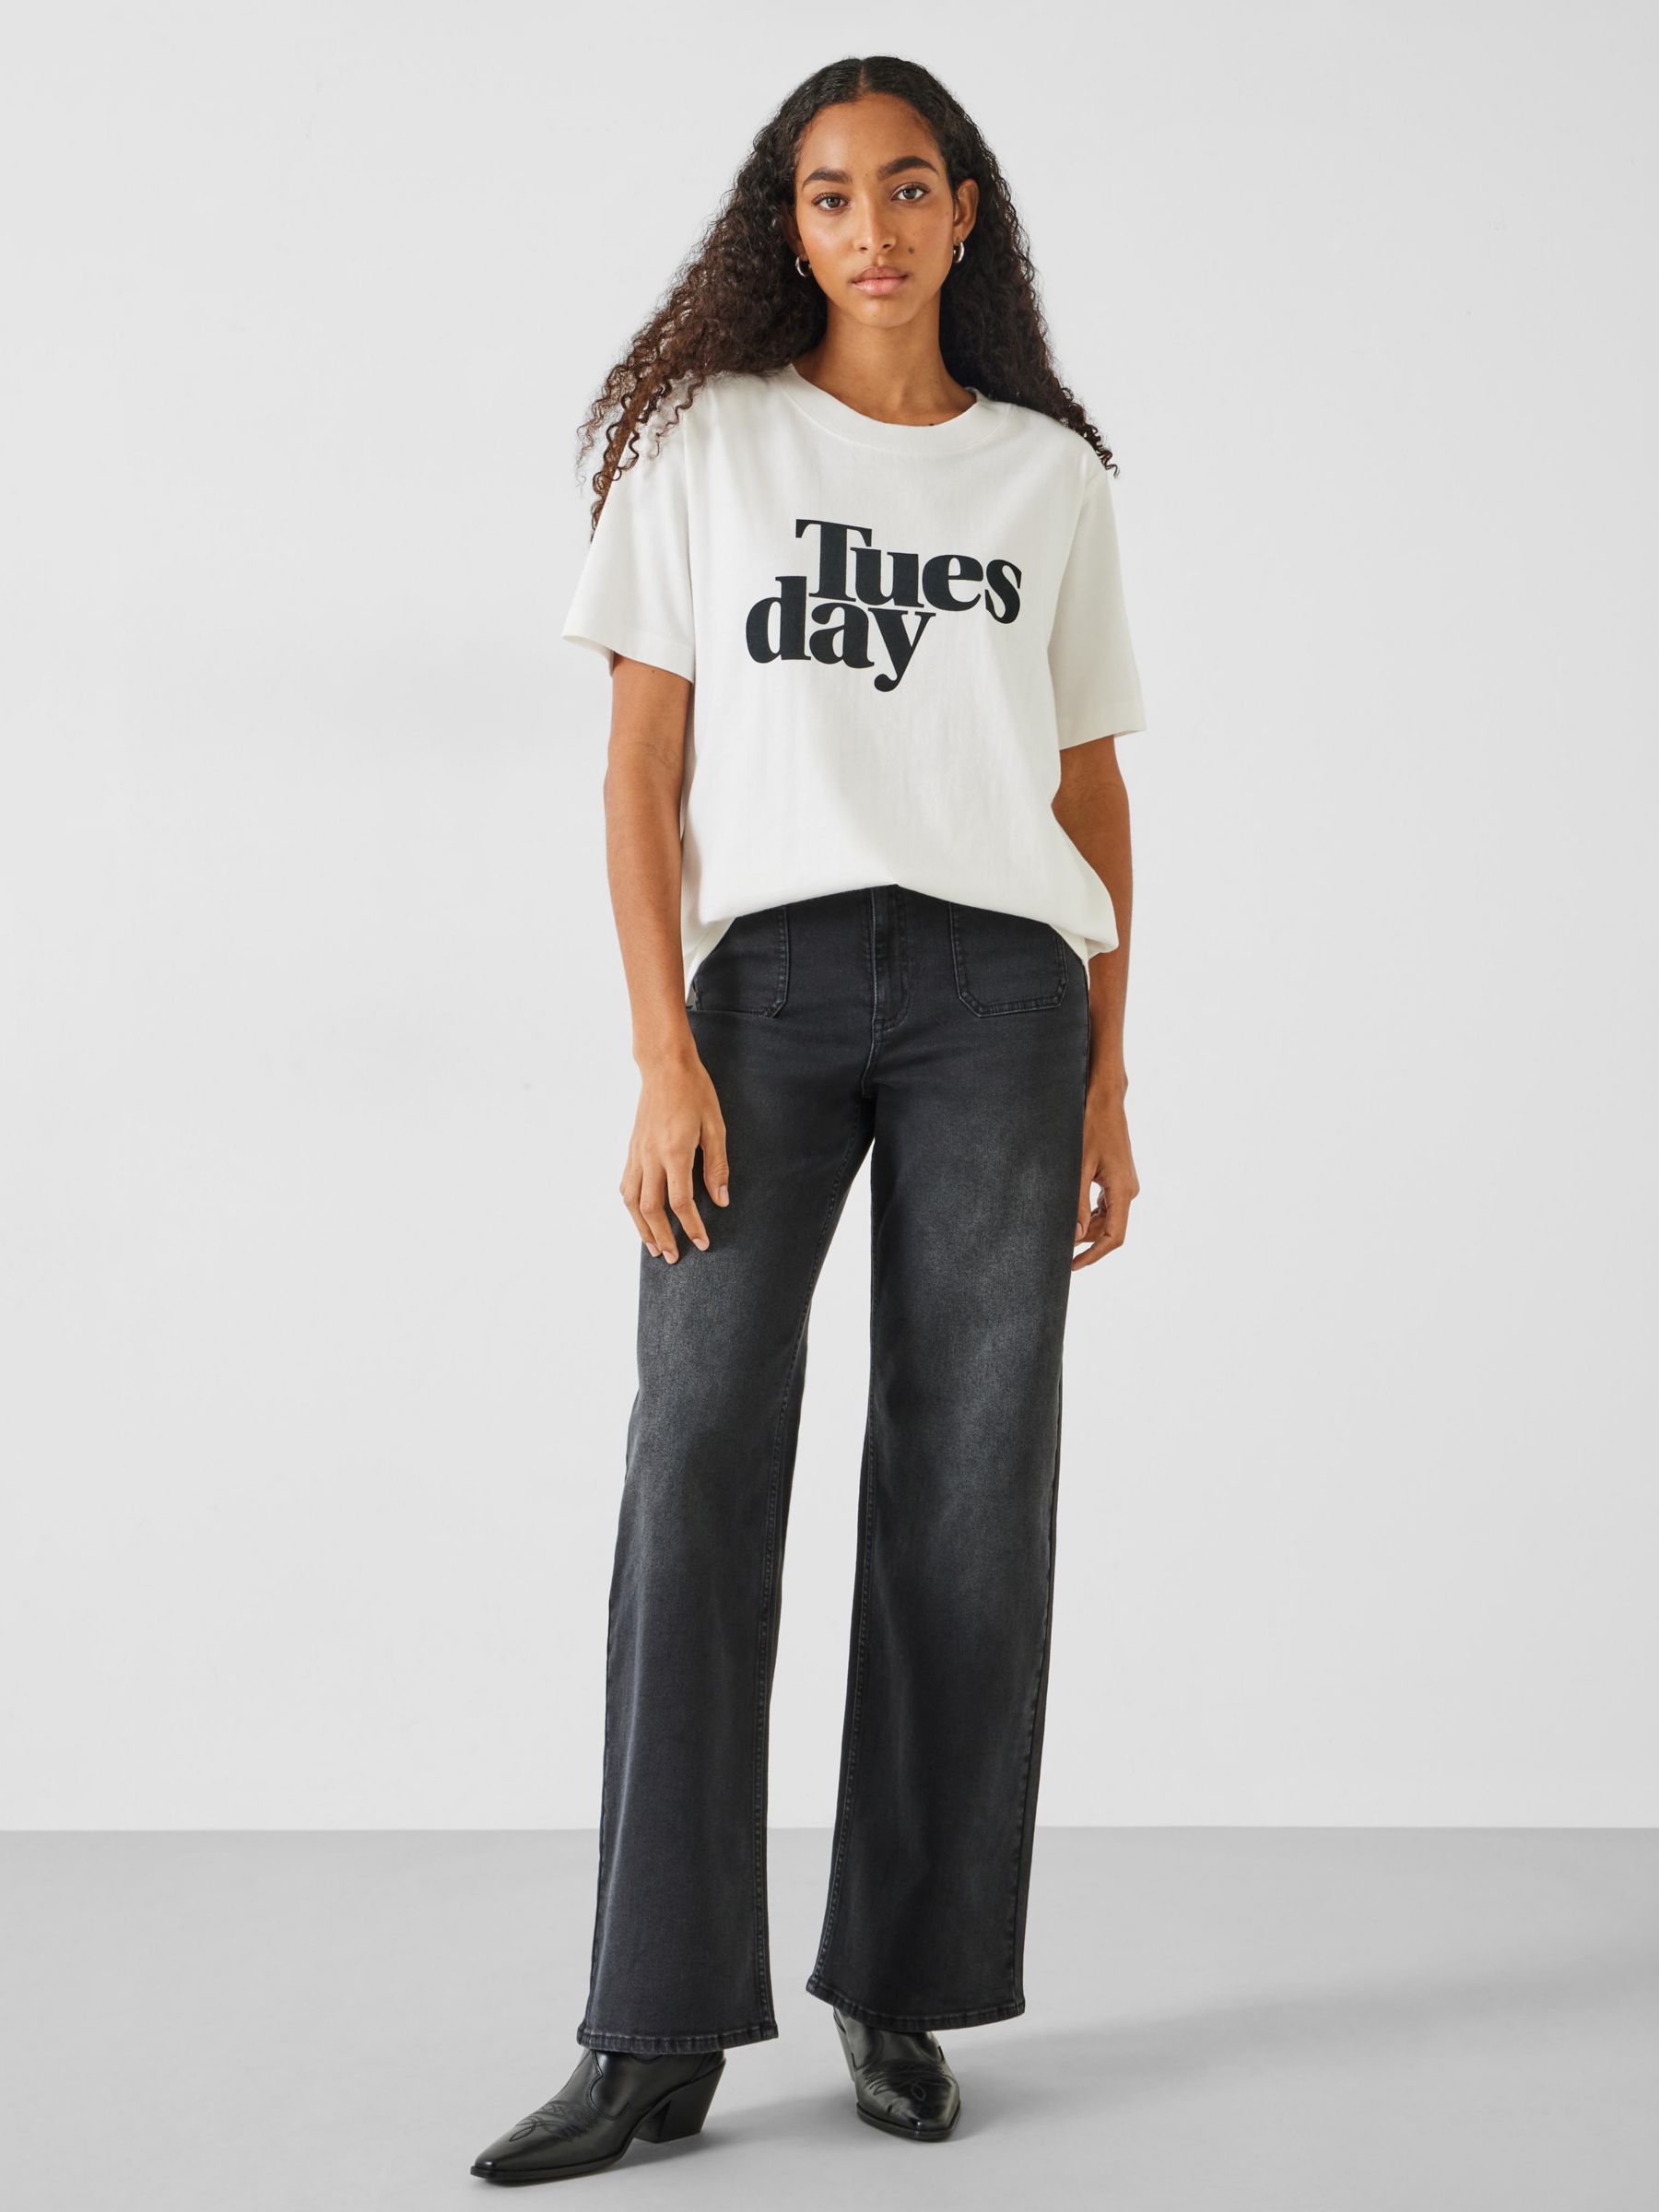 Buy HUSH Tuesday Graphic Cotton T-shirt, White Online at johnlewis.com